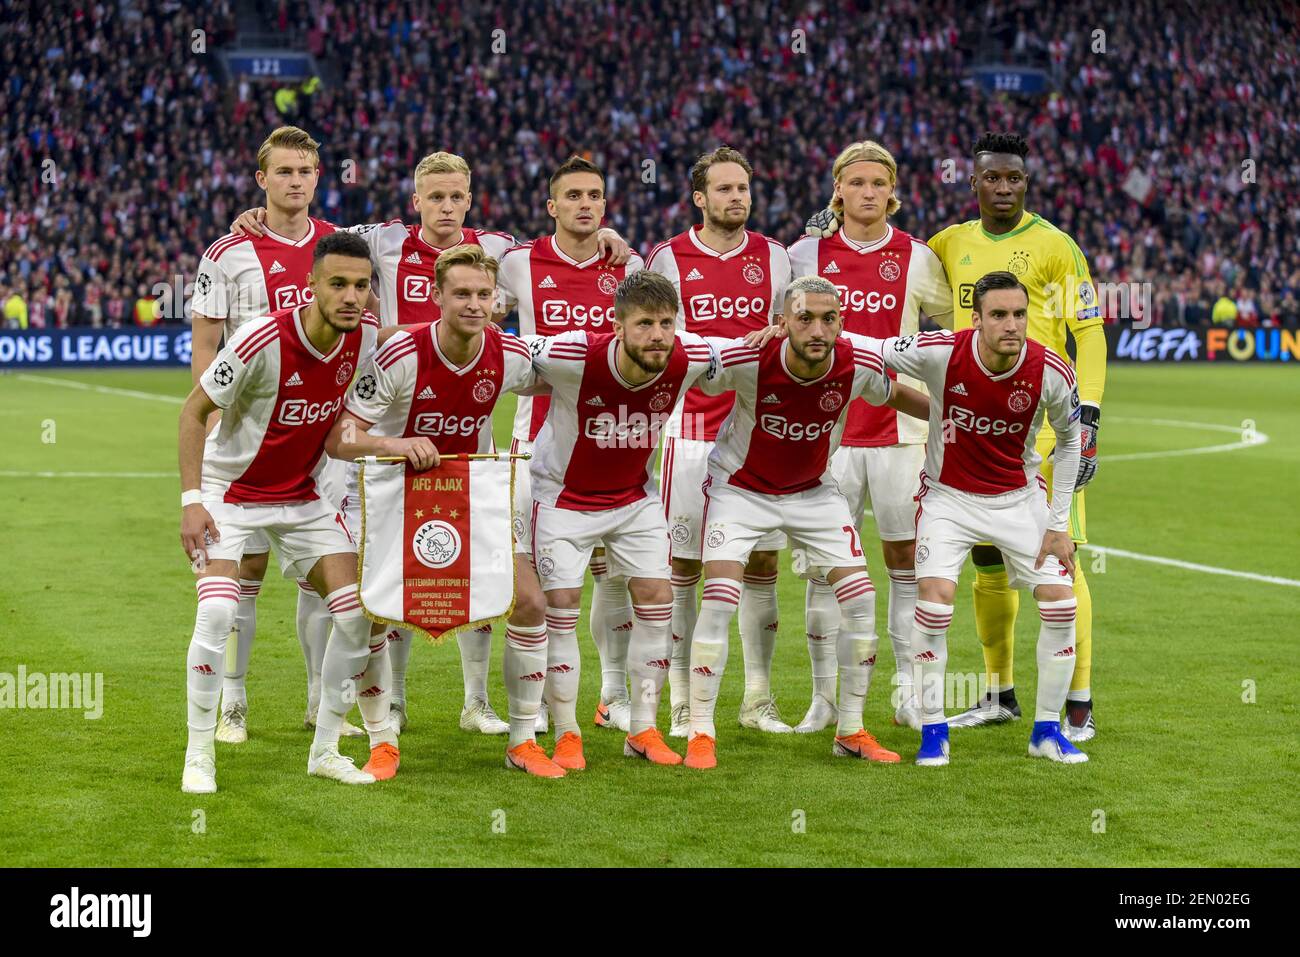 Ajax football team poses for a photo during the UEFA Champions League Semi- Final match between AFC Ajax Amsterdam and Tottenham Hotspur FC at Johan  Cruijff ArenA in Amsterdam, Netherlands on May 8,